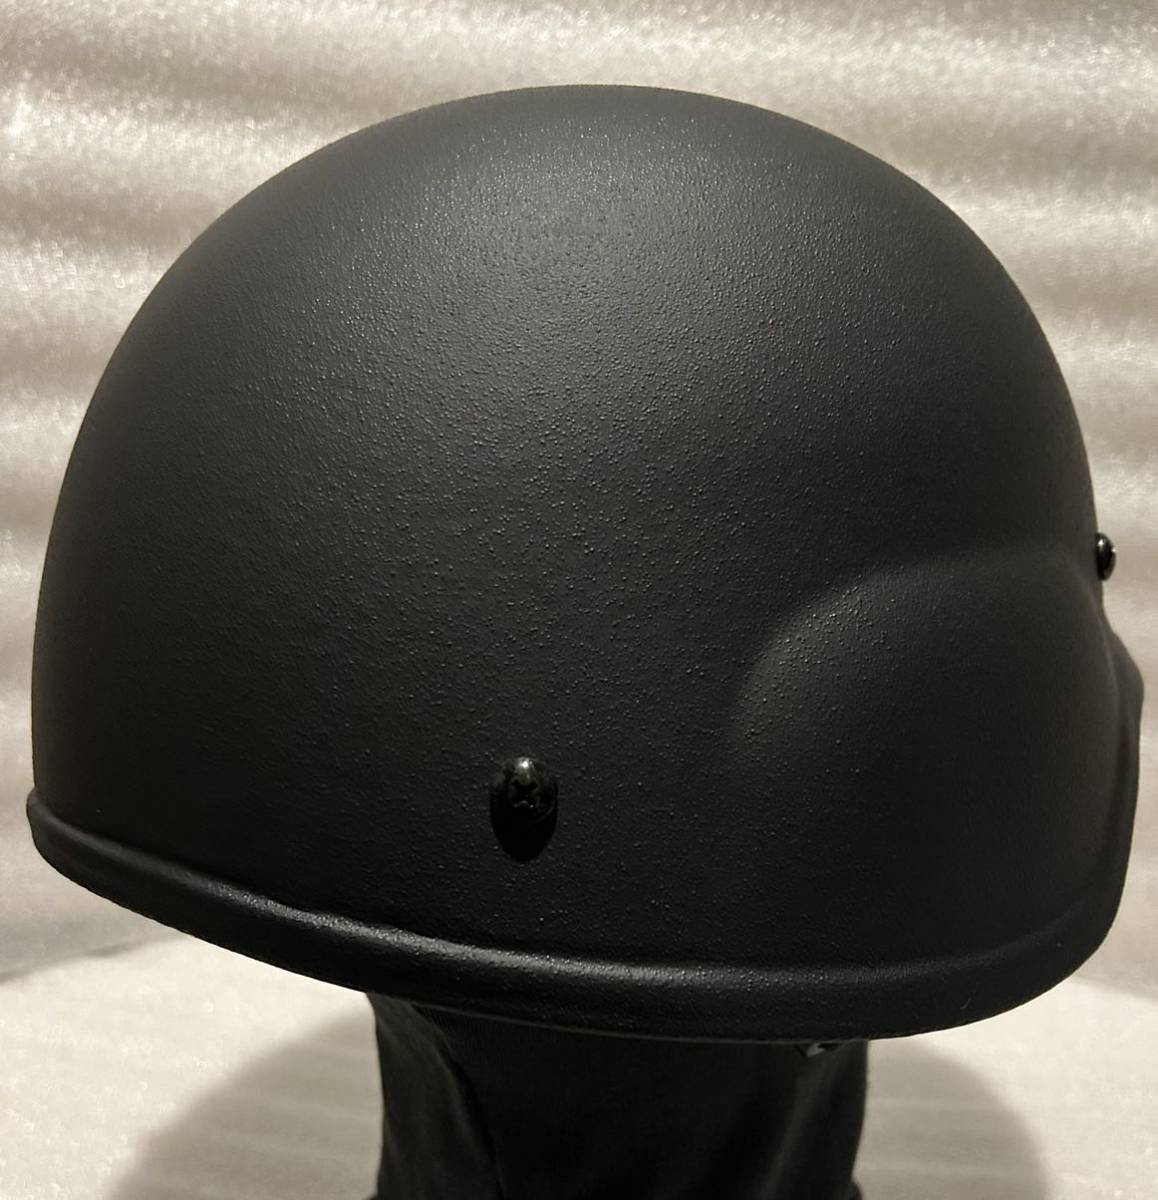  free shipping bulletproof helmet ( the truth thing ) 2024 1 manufacture 58~62cm NIJ Revell 3a 9mm 357sig 44mag new goods war ground taking material disaster prevention ....